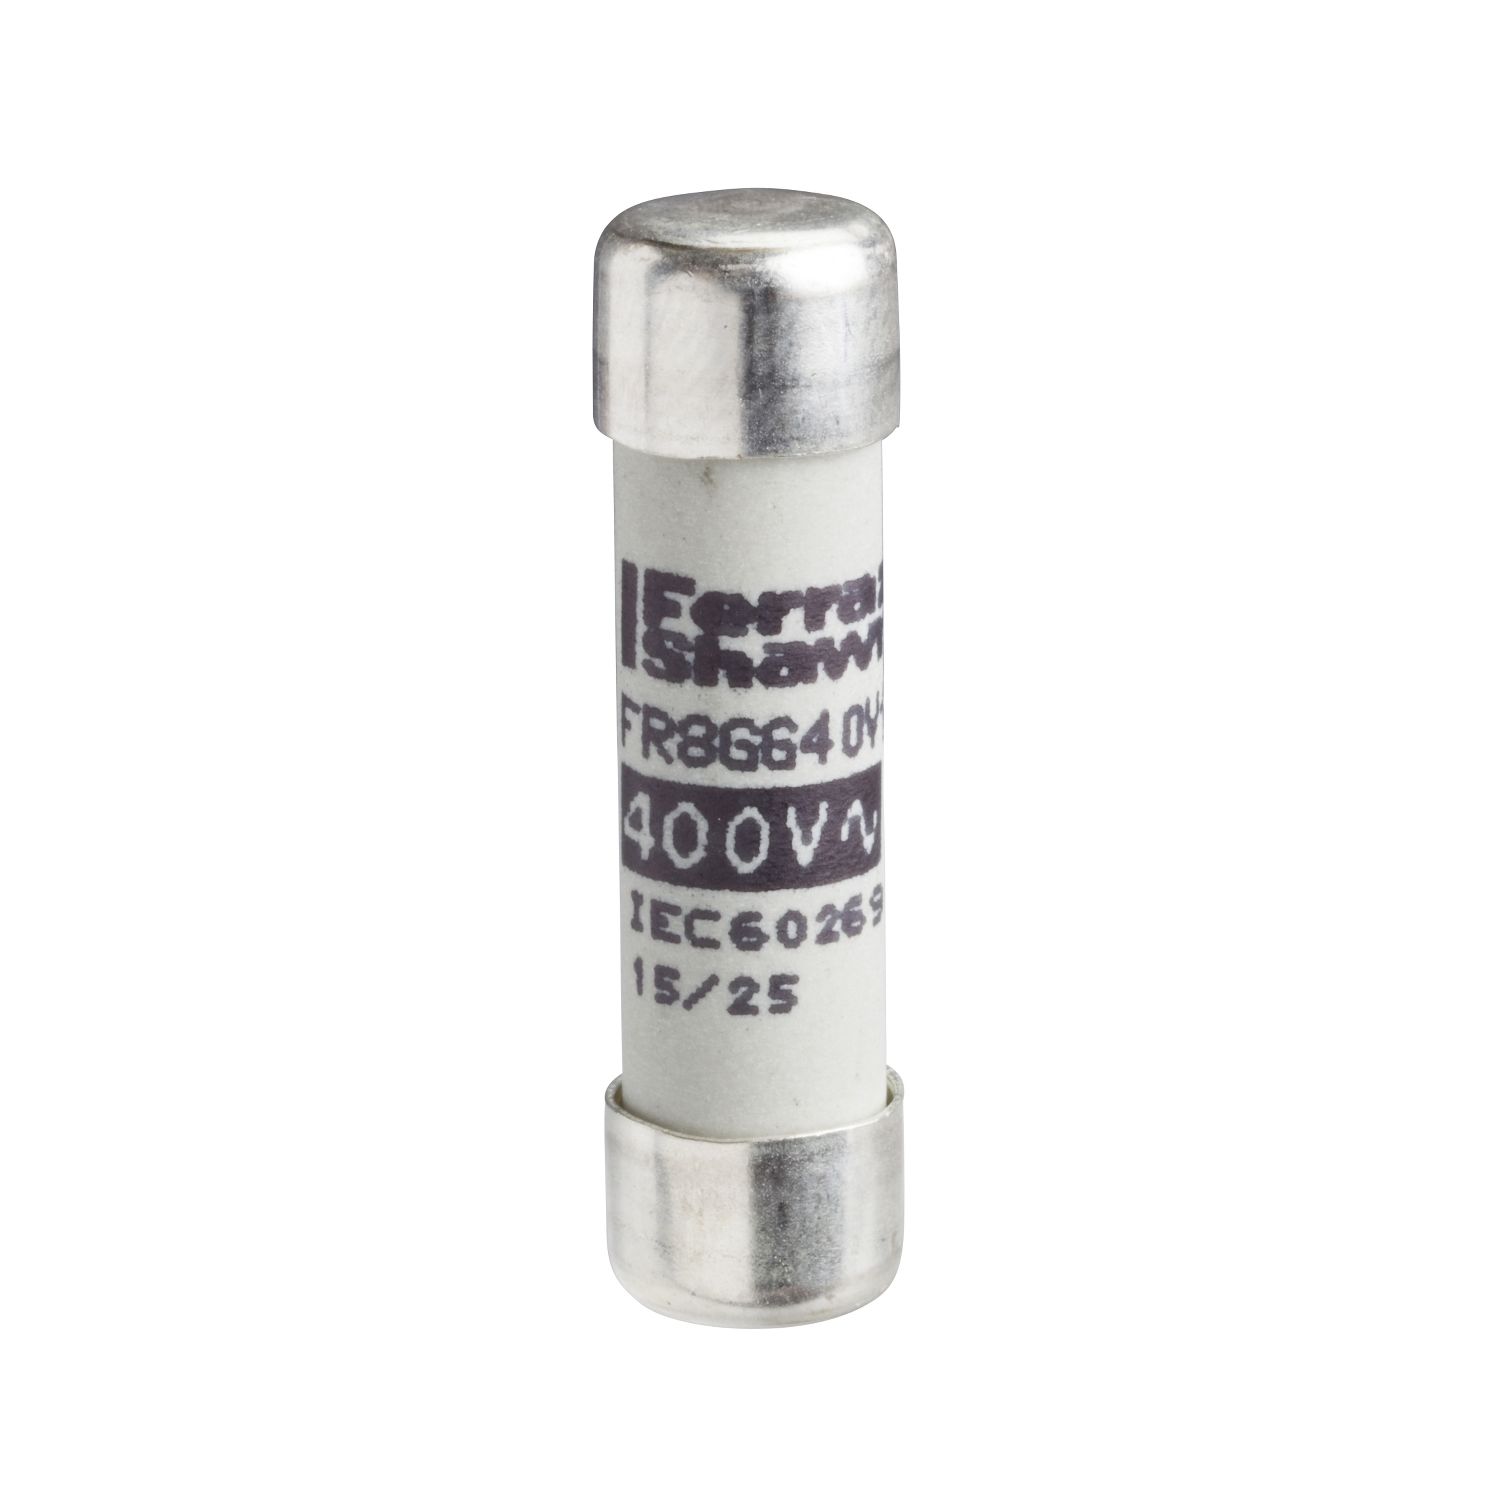 DF2BN2000 NFC cartridge fuses, TeSys GS, cylindrical 8.5mm x 31.5mm, fuse type gG, 400VAC, 20A, without striker